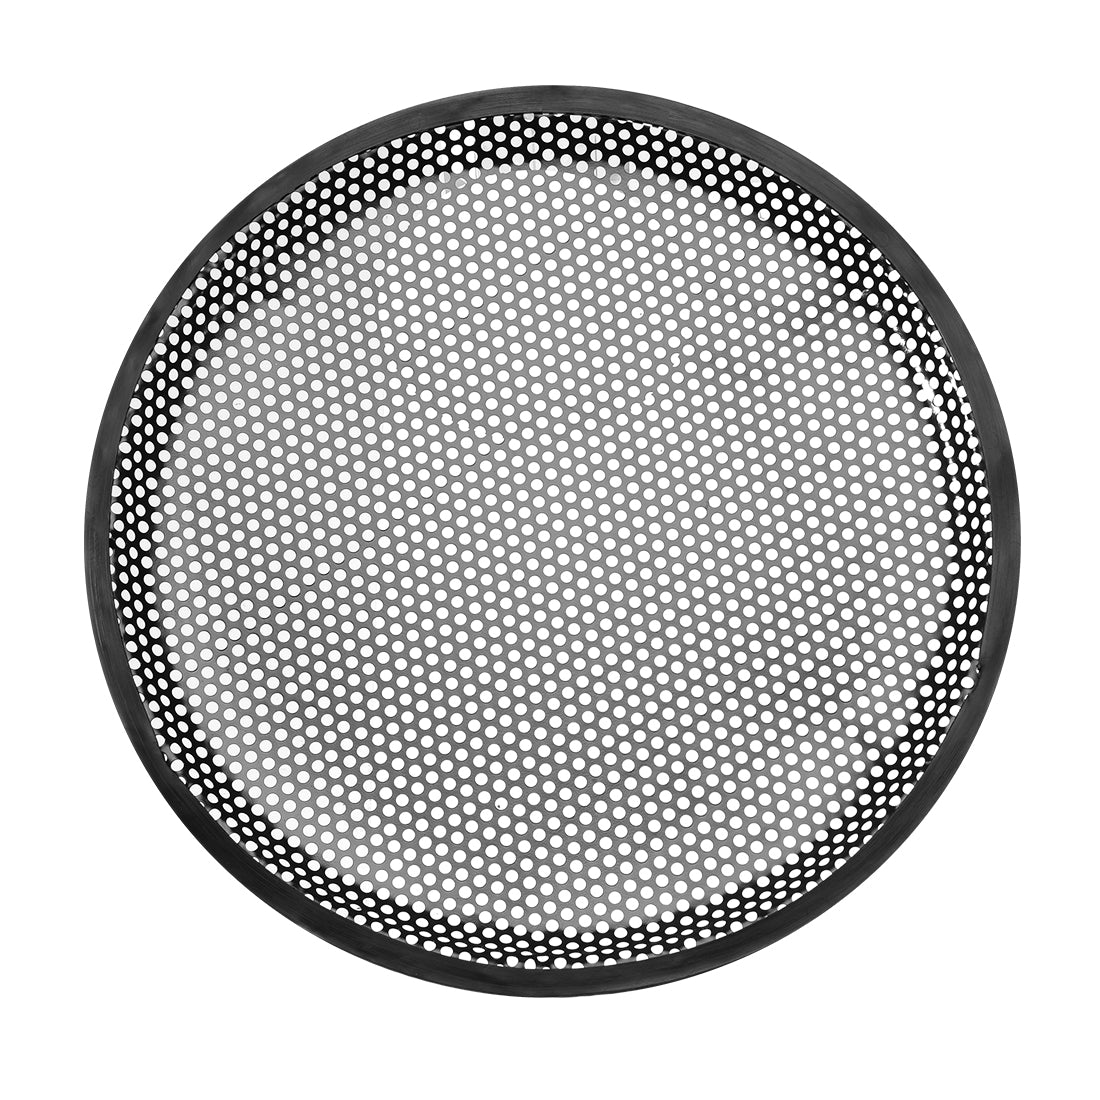 uxcell Uxcell 2pcs 12" Speaker Waffle Grill Metal Mesh Audio Subwoofer Guard Protector Cover with Clips,Screws